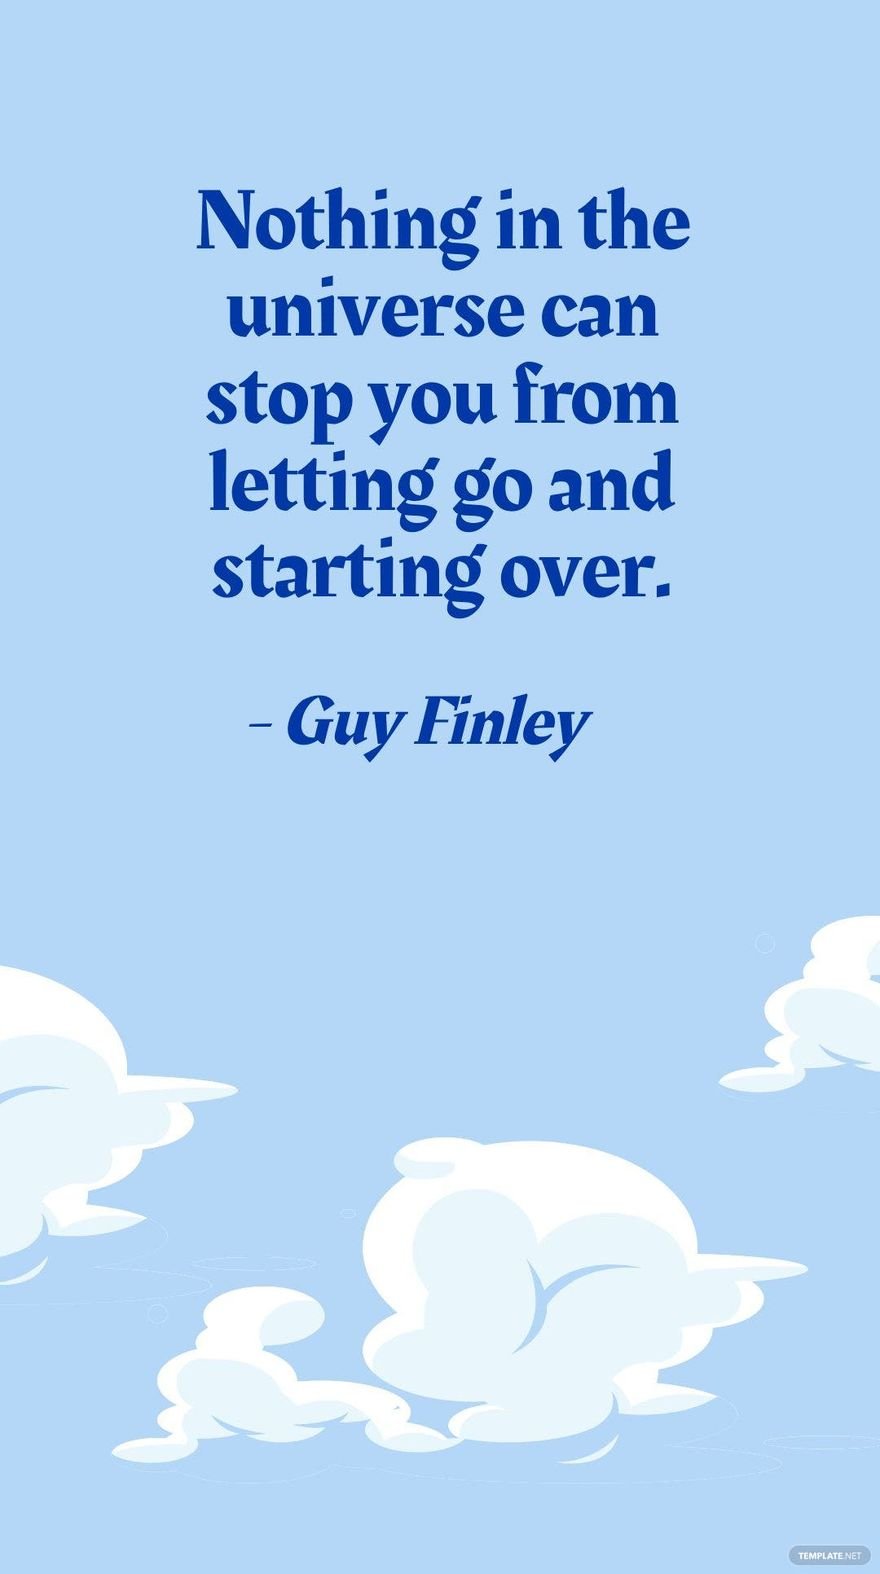 Guy Finley - Nothing in the universe can stop you from letting go and starting over. in JPG